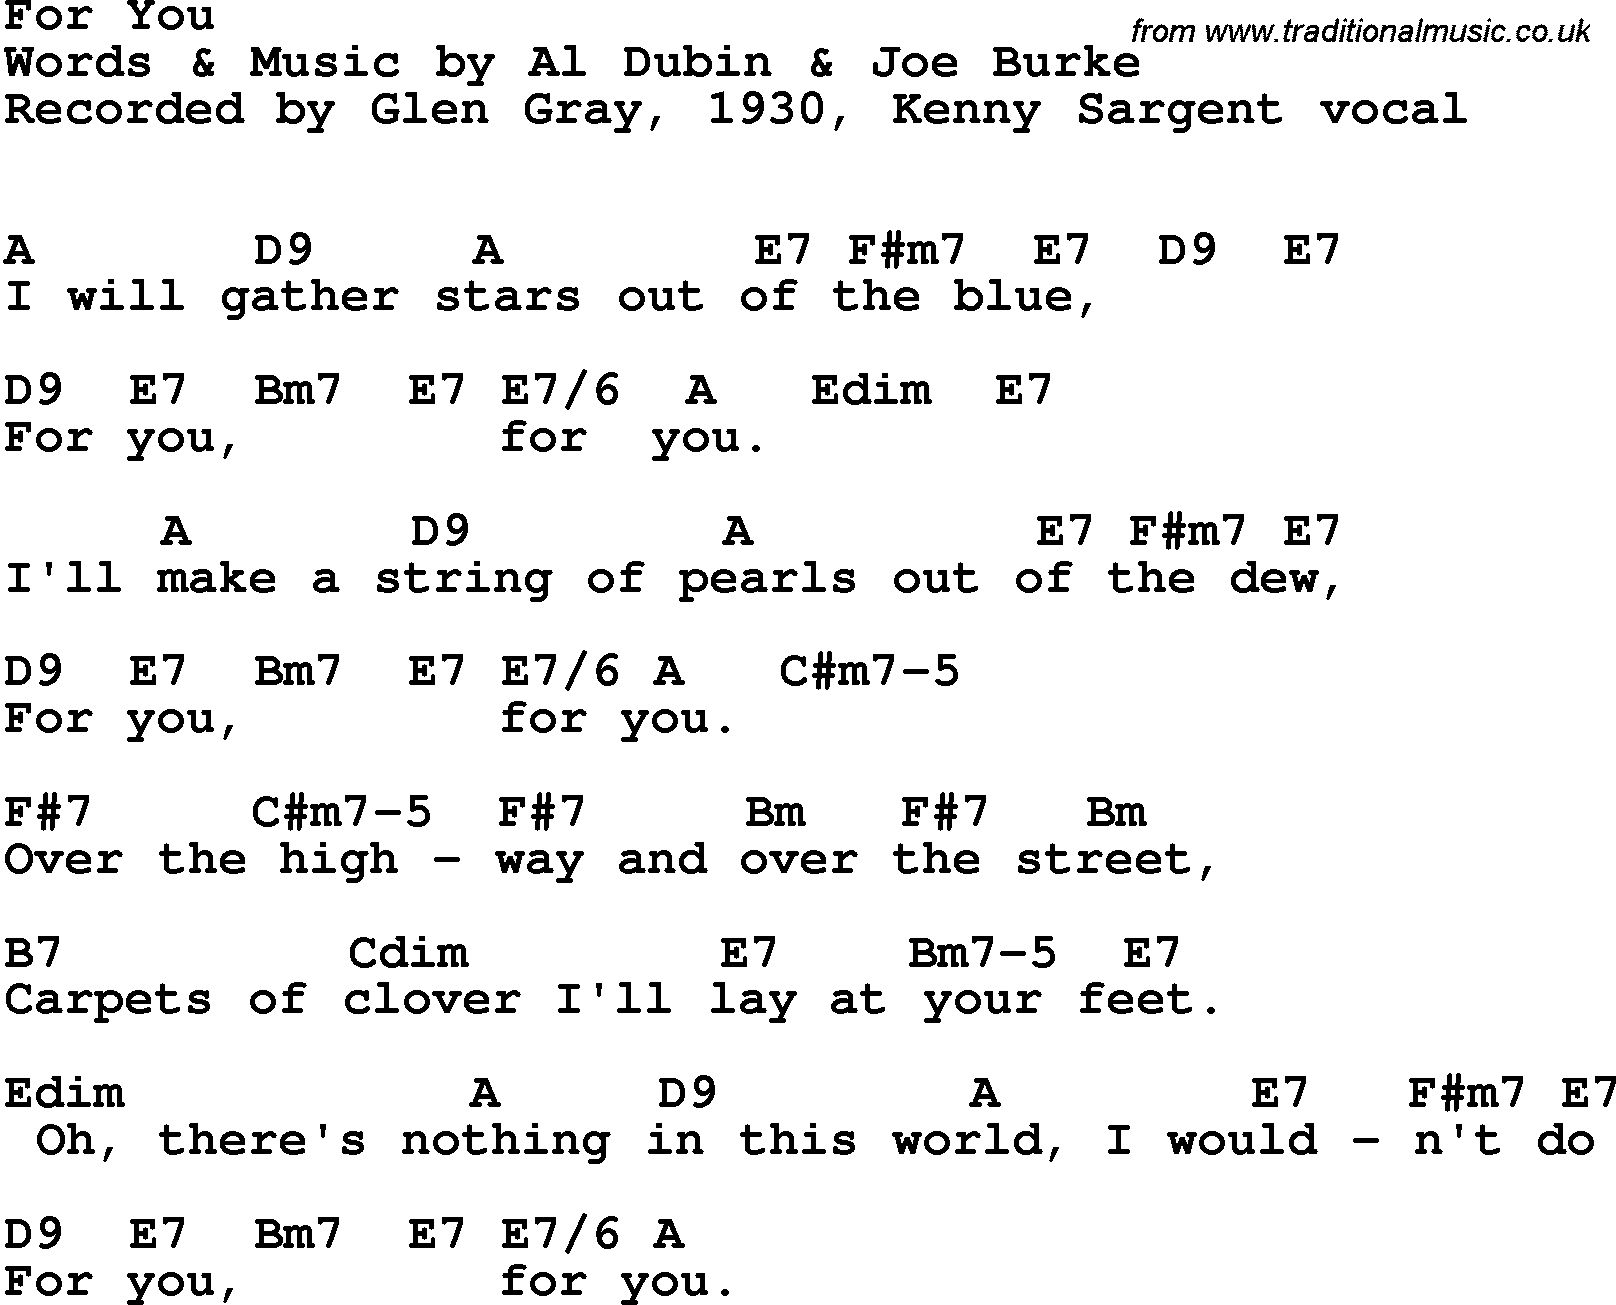 Song Lyrics with guitar chords for For You - Glen Gray, 1930